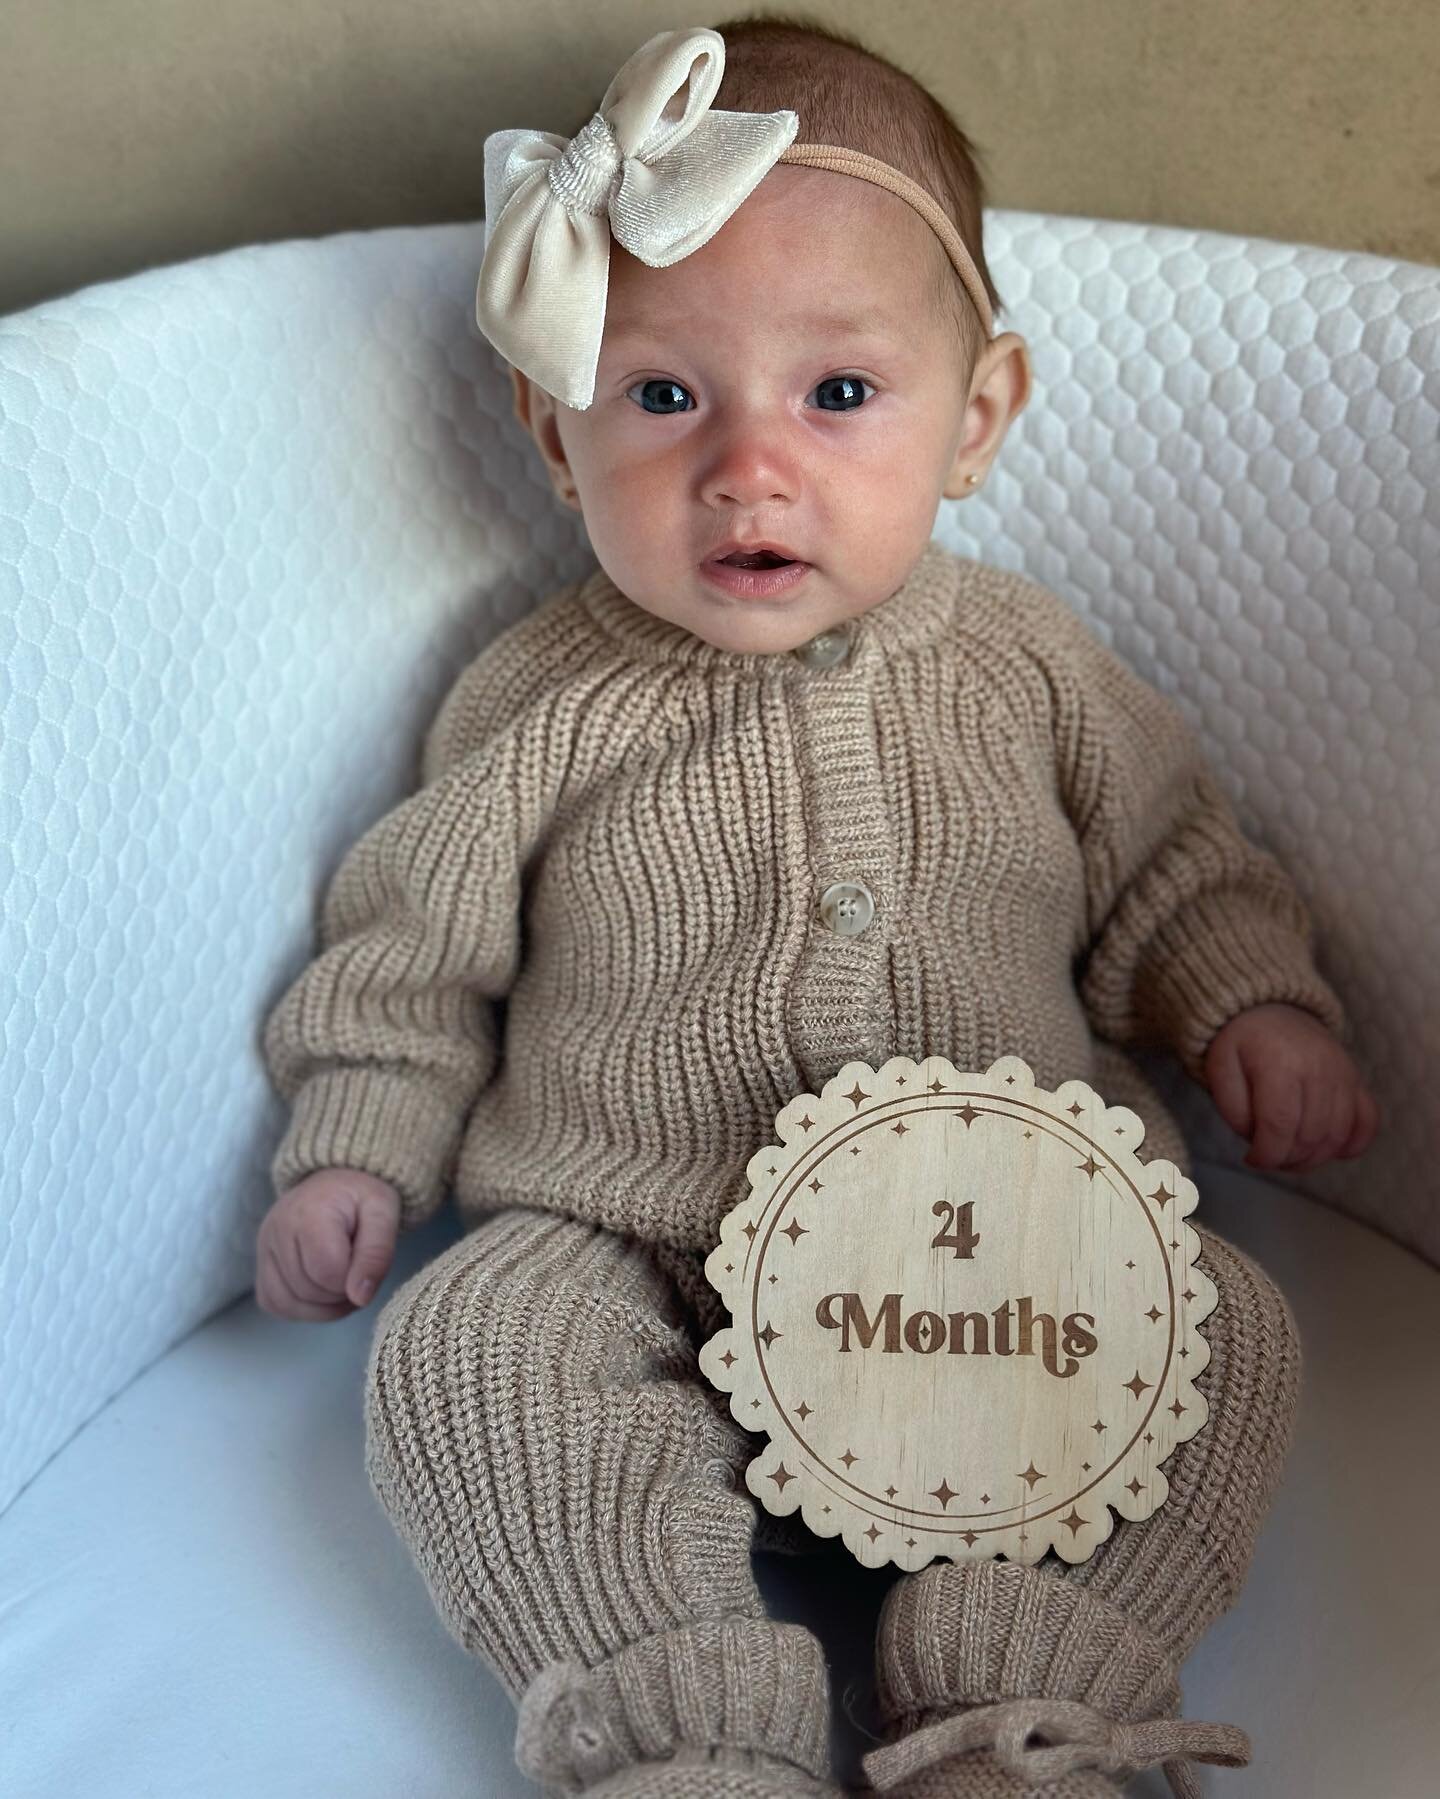 4 months : : Time is flying and we are soaking up every second with her. 

&bull;first flight 
&bull;first time at the beach 
&bull;first time seeing where mom and dad got married 
&bull;first hawaii trip 
&bull;started making sounds and giggling 
&b